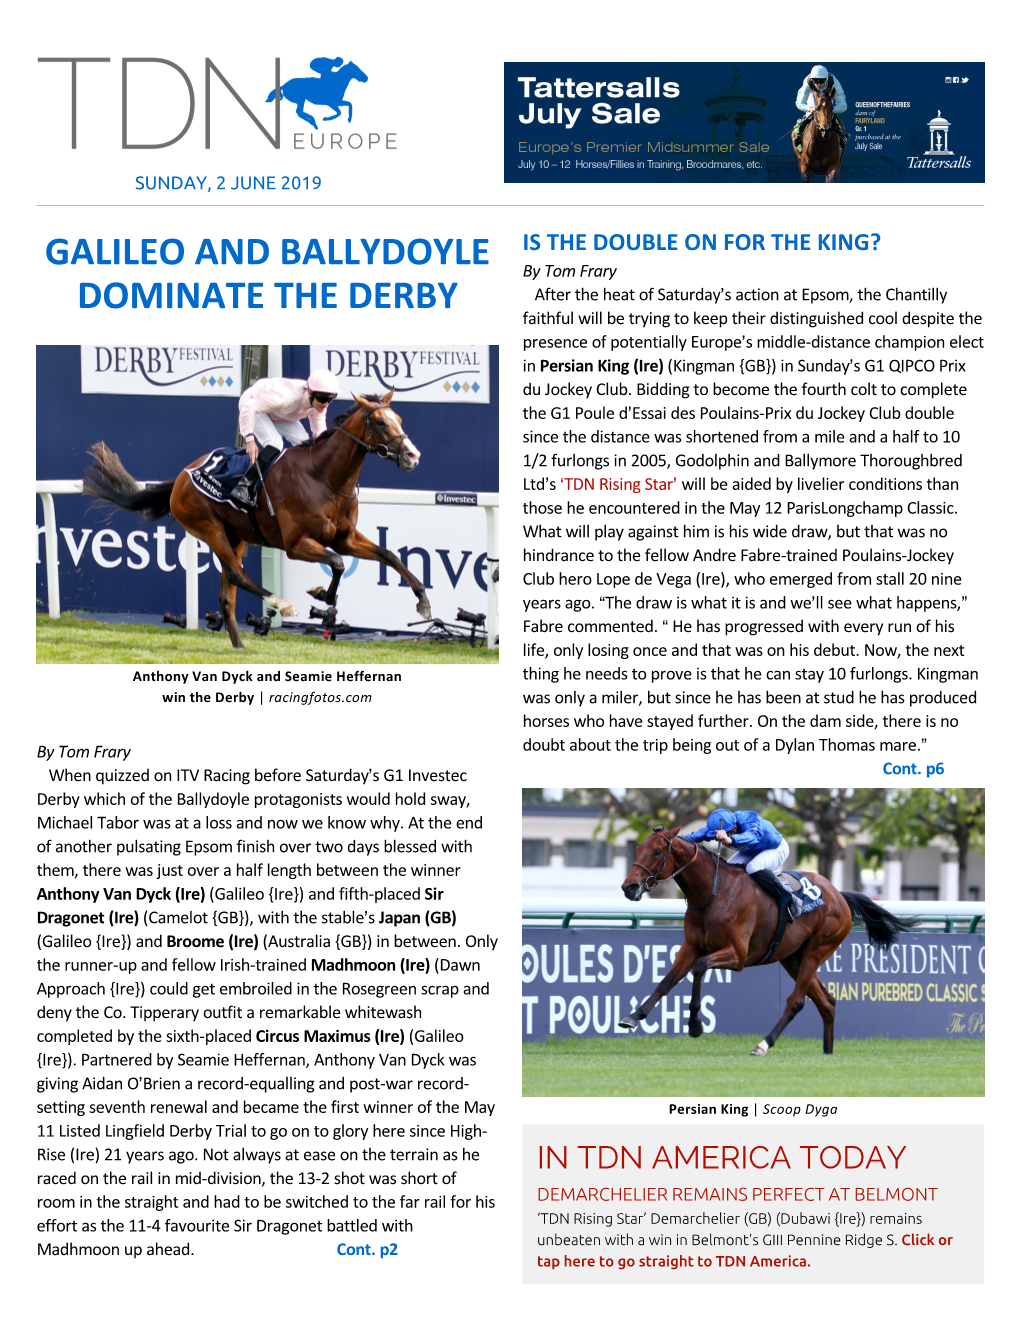 Galileo and Ballydoyle Dominate the Derby Cont